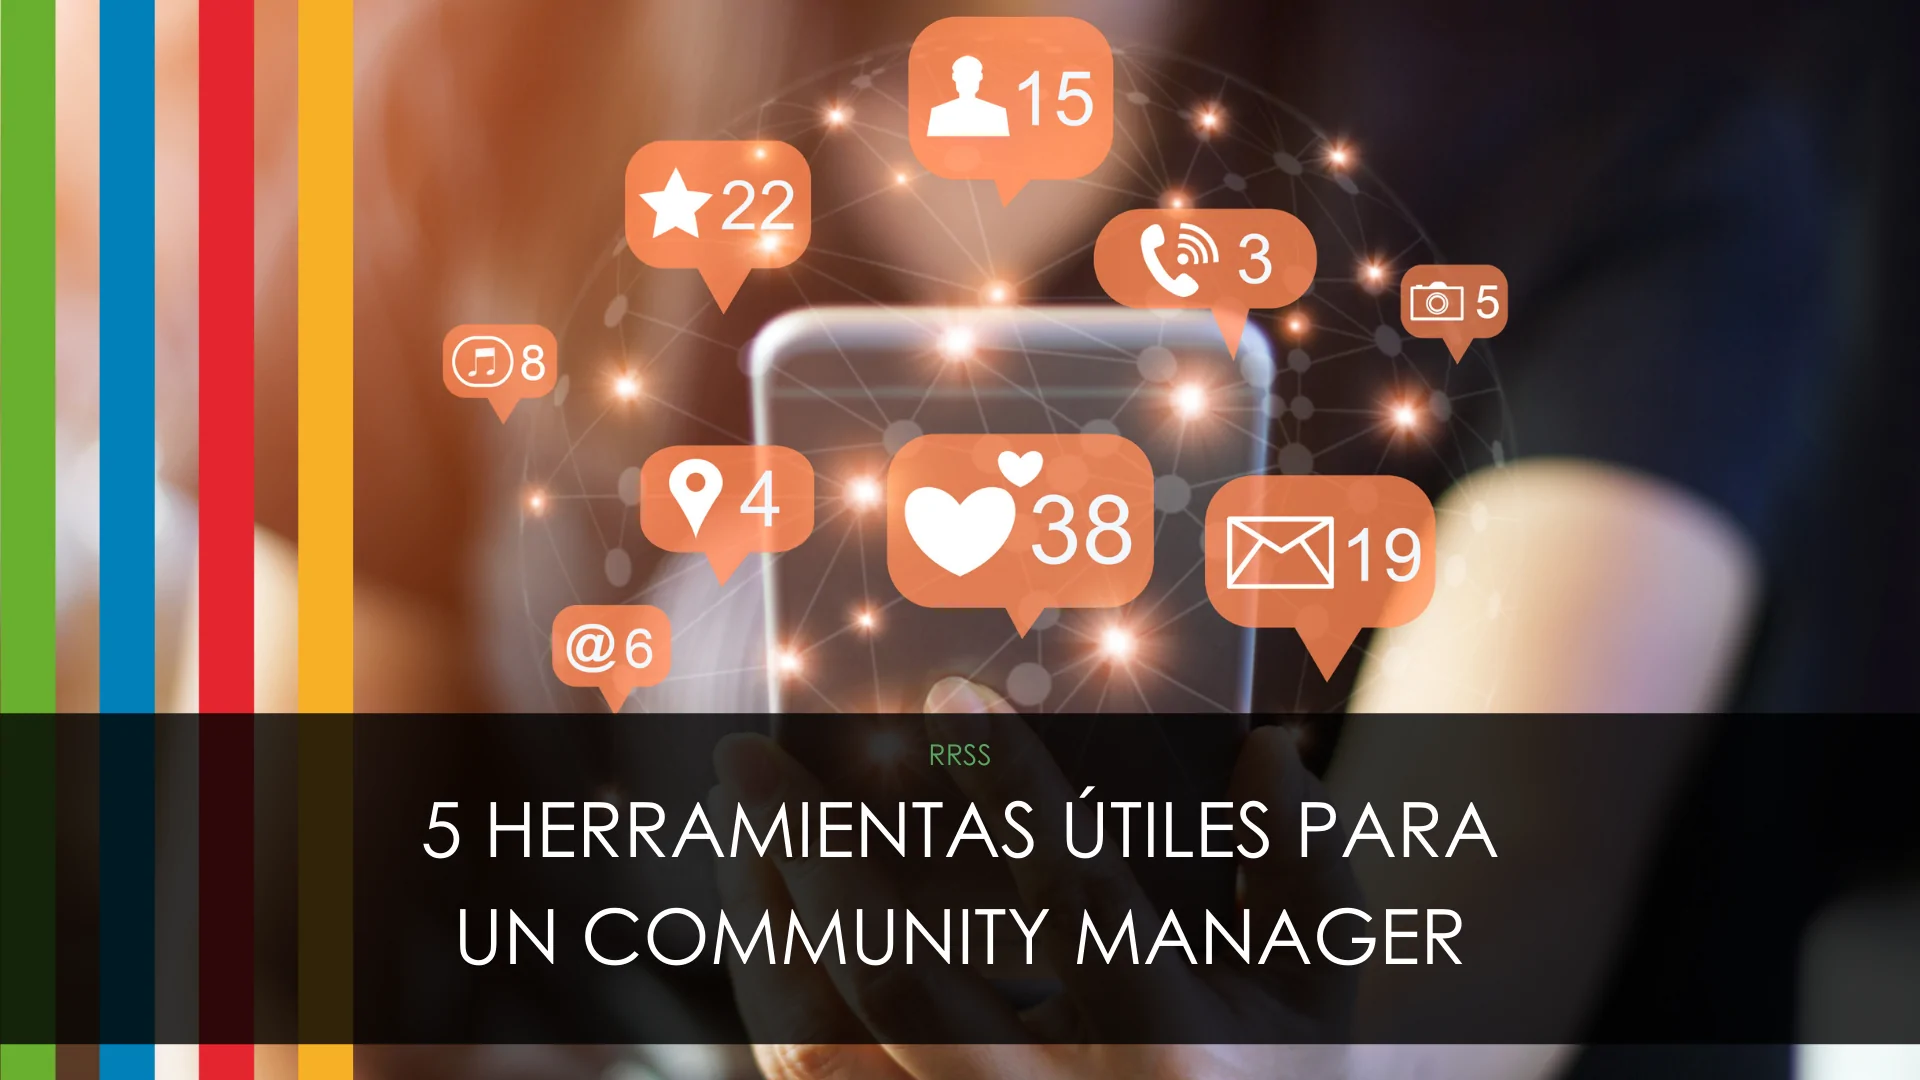 6 useful tools for a Community Manager